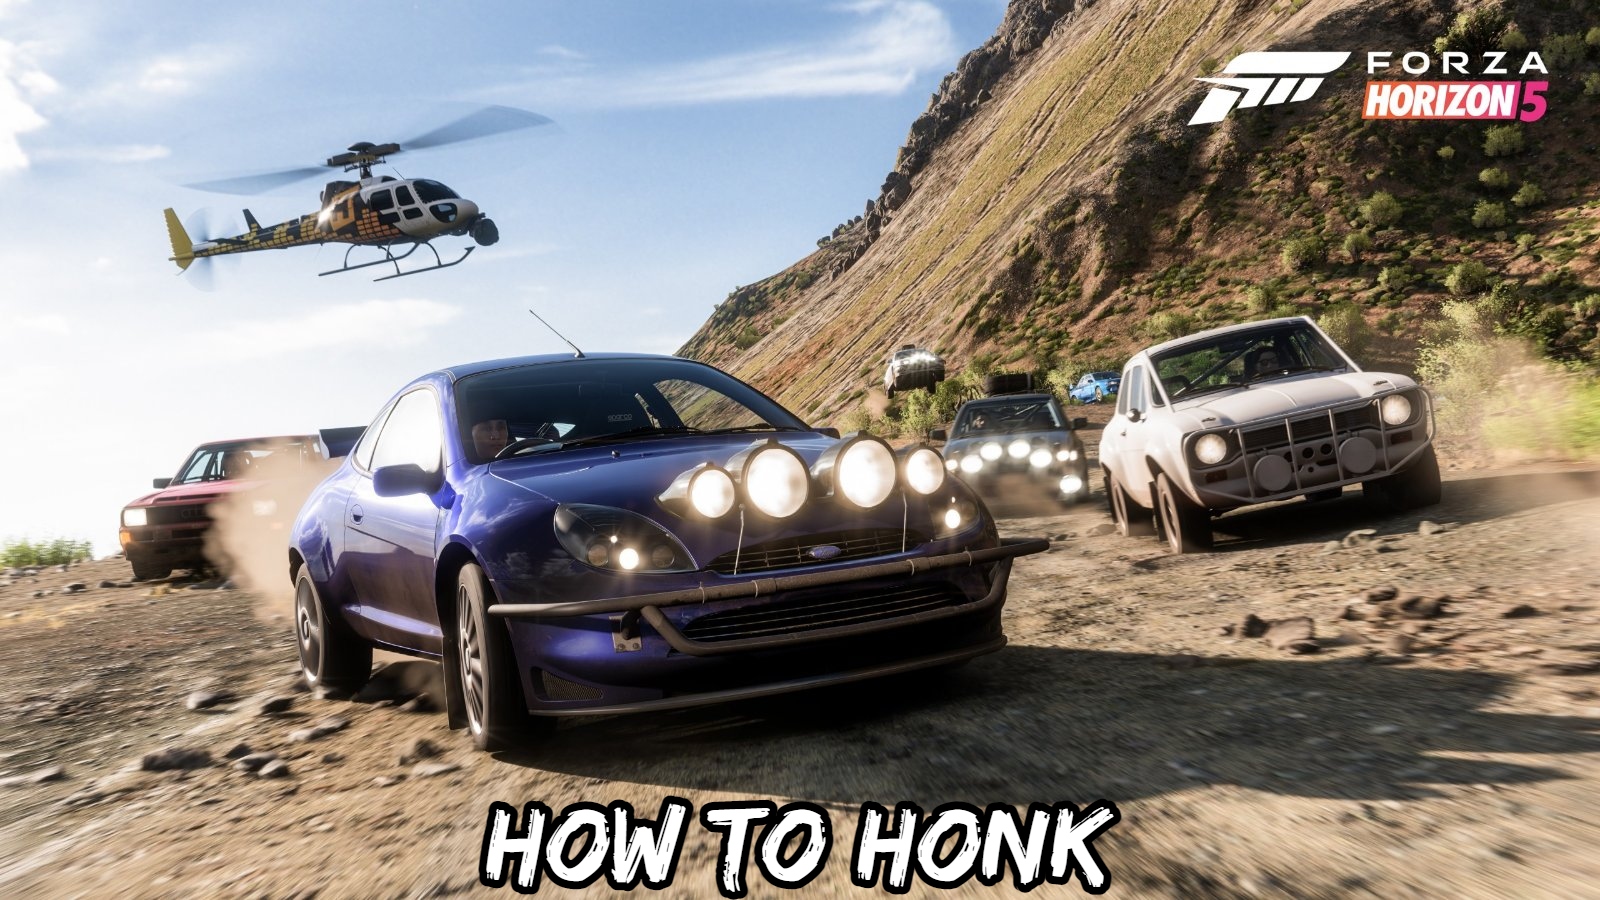 You are currently viewing How To Honk In Forza Horizon 5 PC